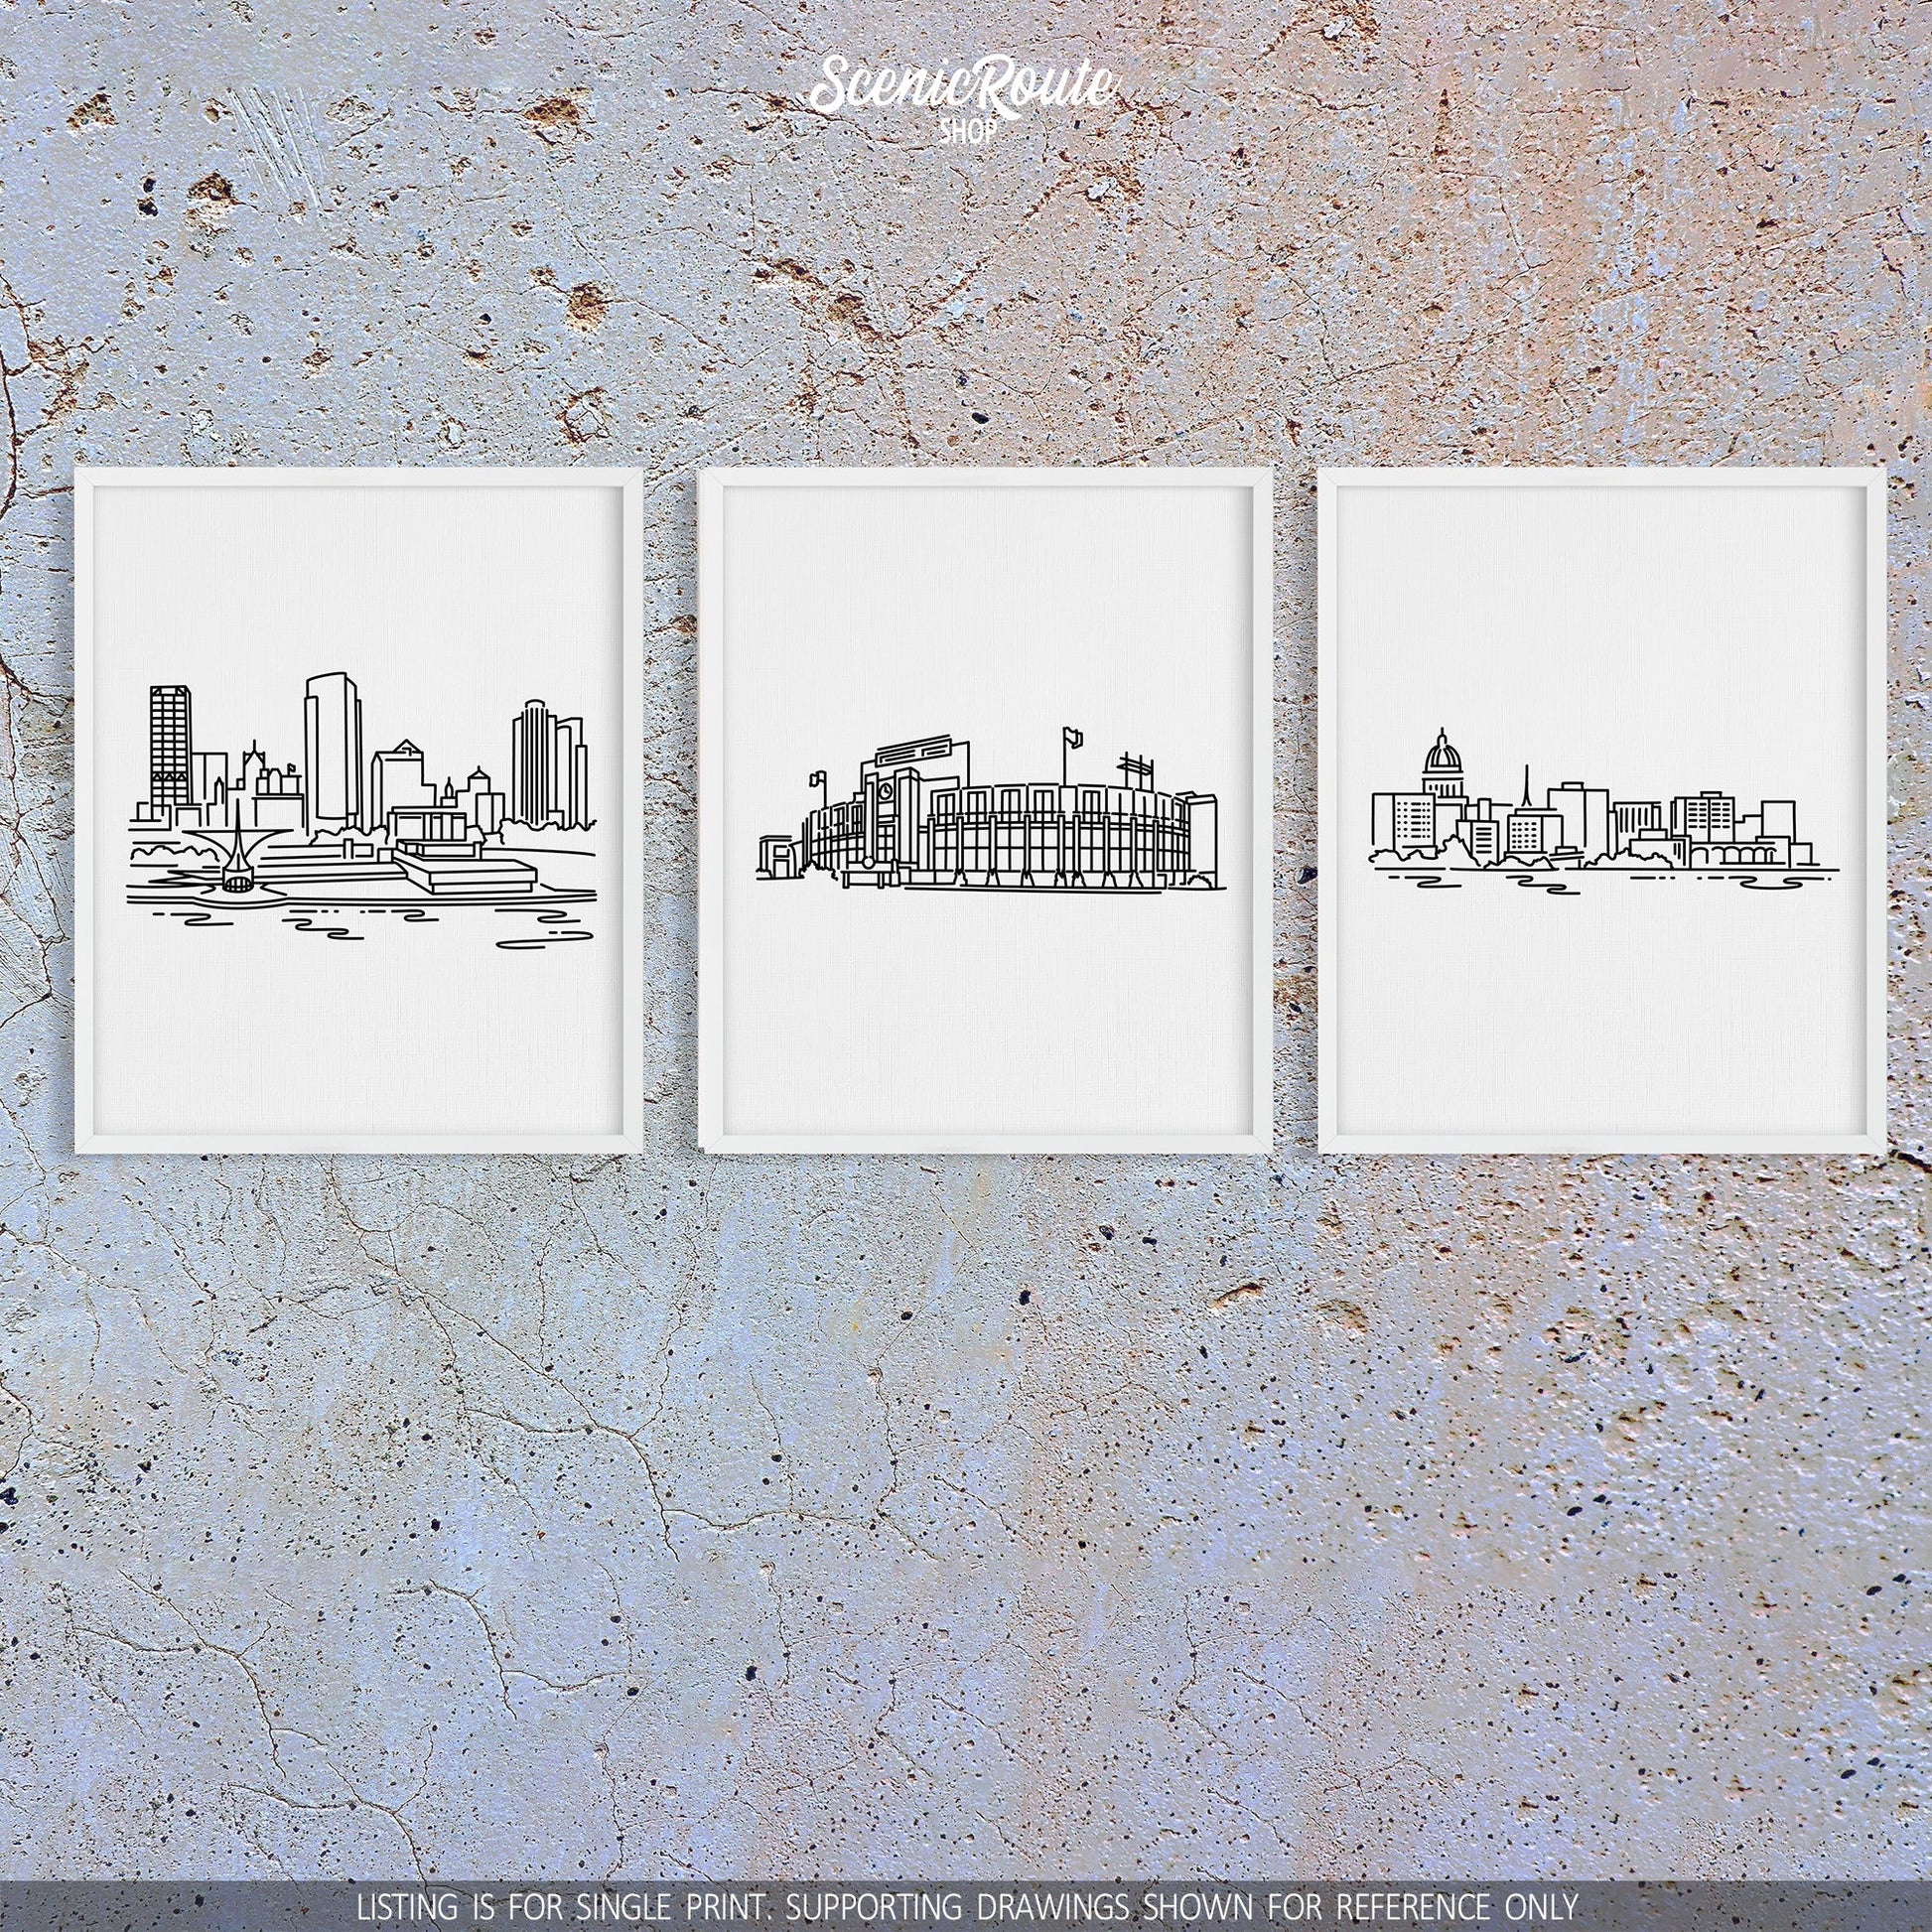 A group of three framed drawings on a concrete wall. The line art drawings include the Milwaukee Skyline, Lambeau Field, and the Madison Skyline